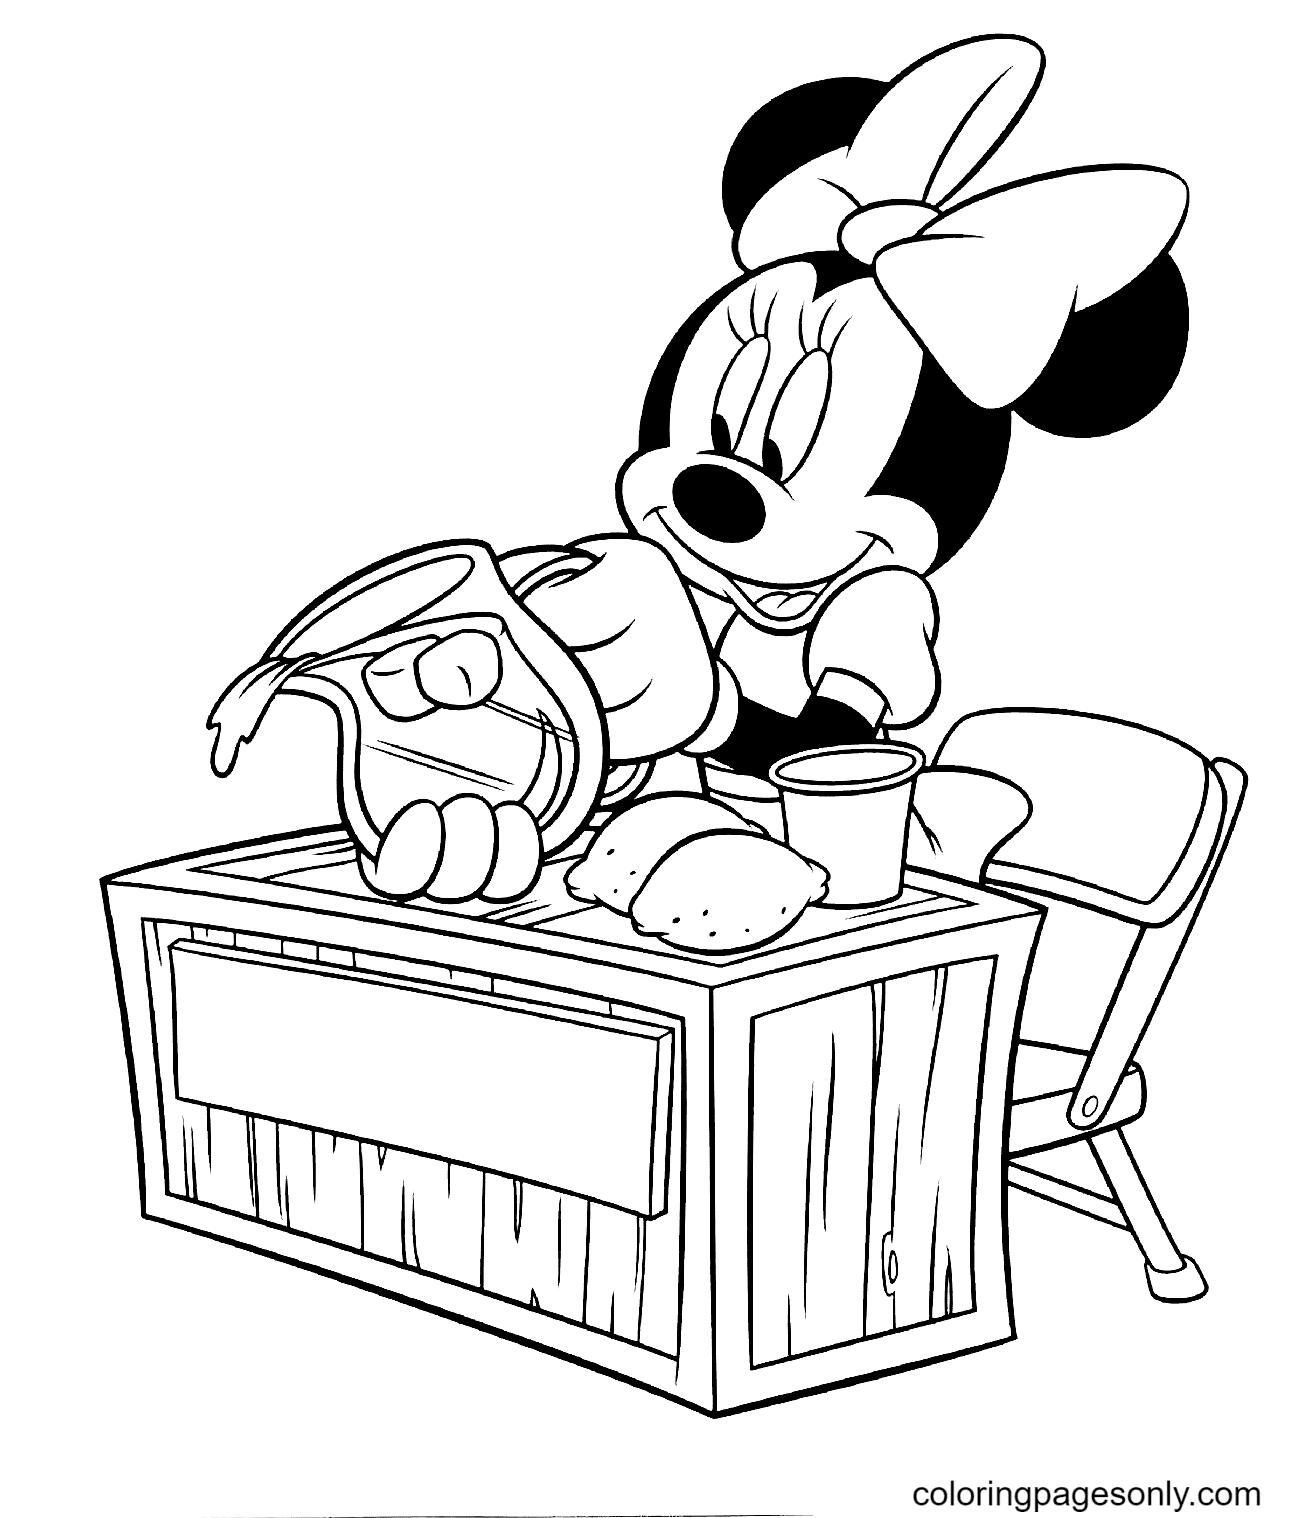 Minnie Is Making Lemon Syrop Coloring Page